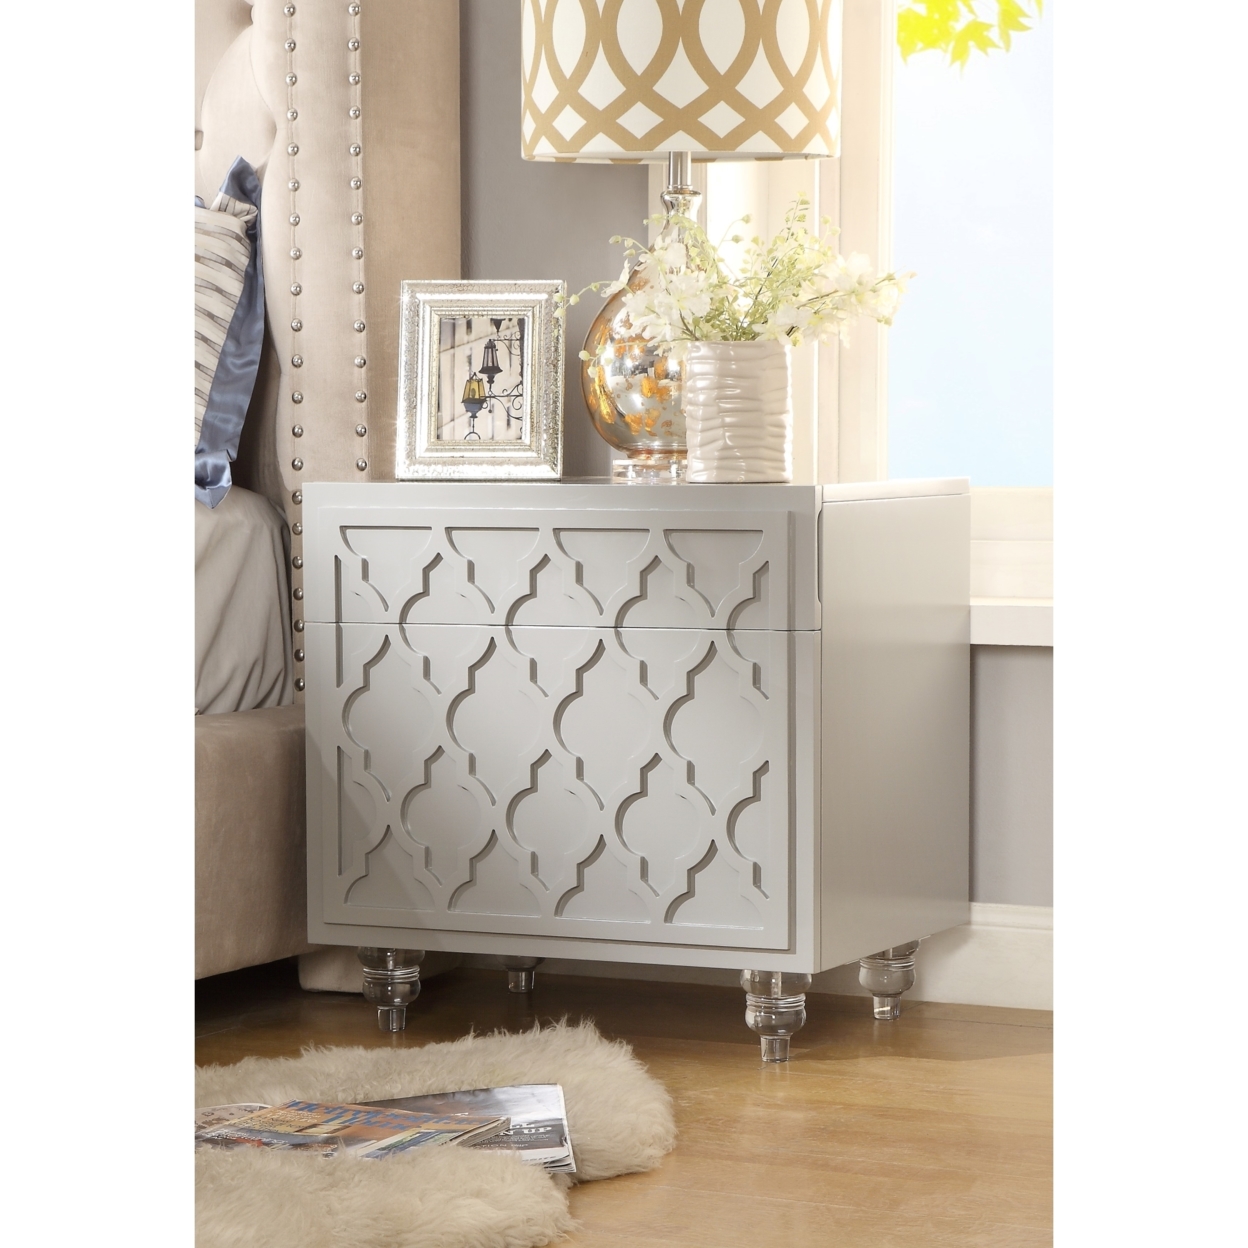 Wilma Glossy Nightstand-Lacquer Finish-Side Table-Acrylic Lucite Legs-Modern & Functional By Inspired Home - White